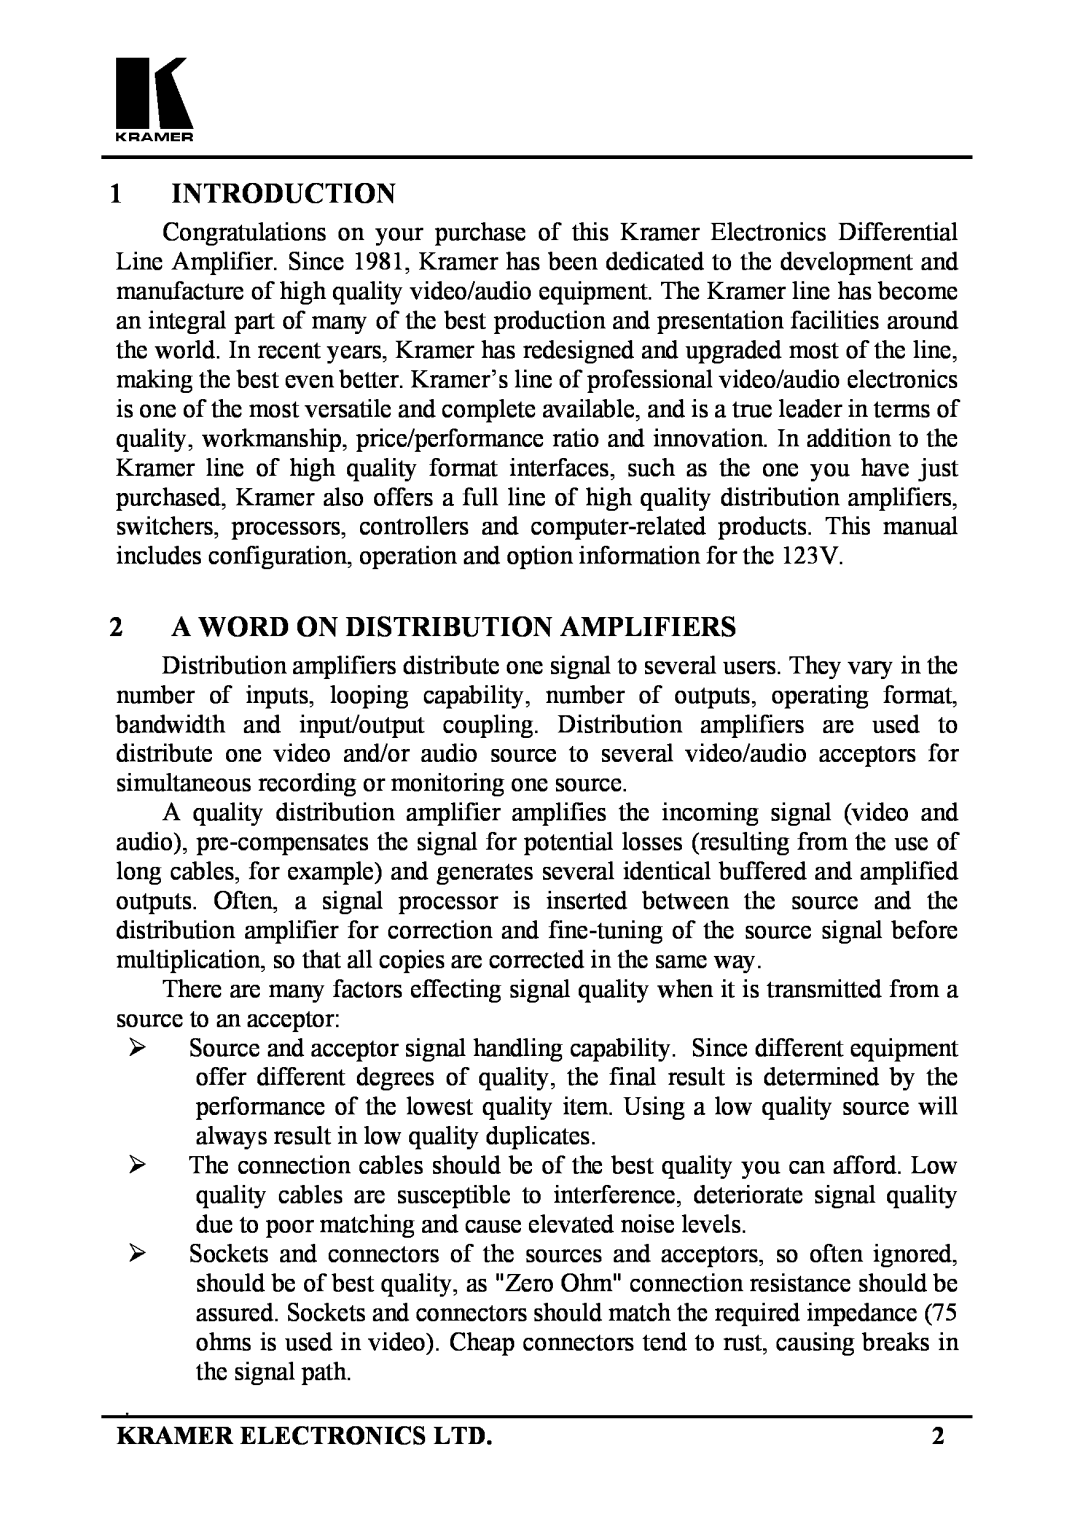 Kramer Electronics 123V user manual Introduction, A Word On Distribution Amplifiers 